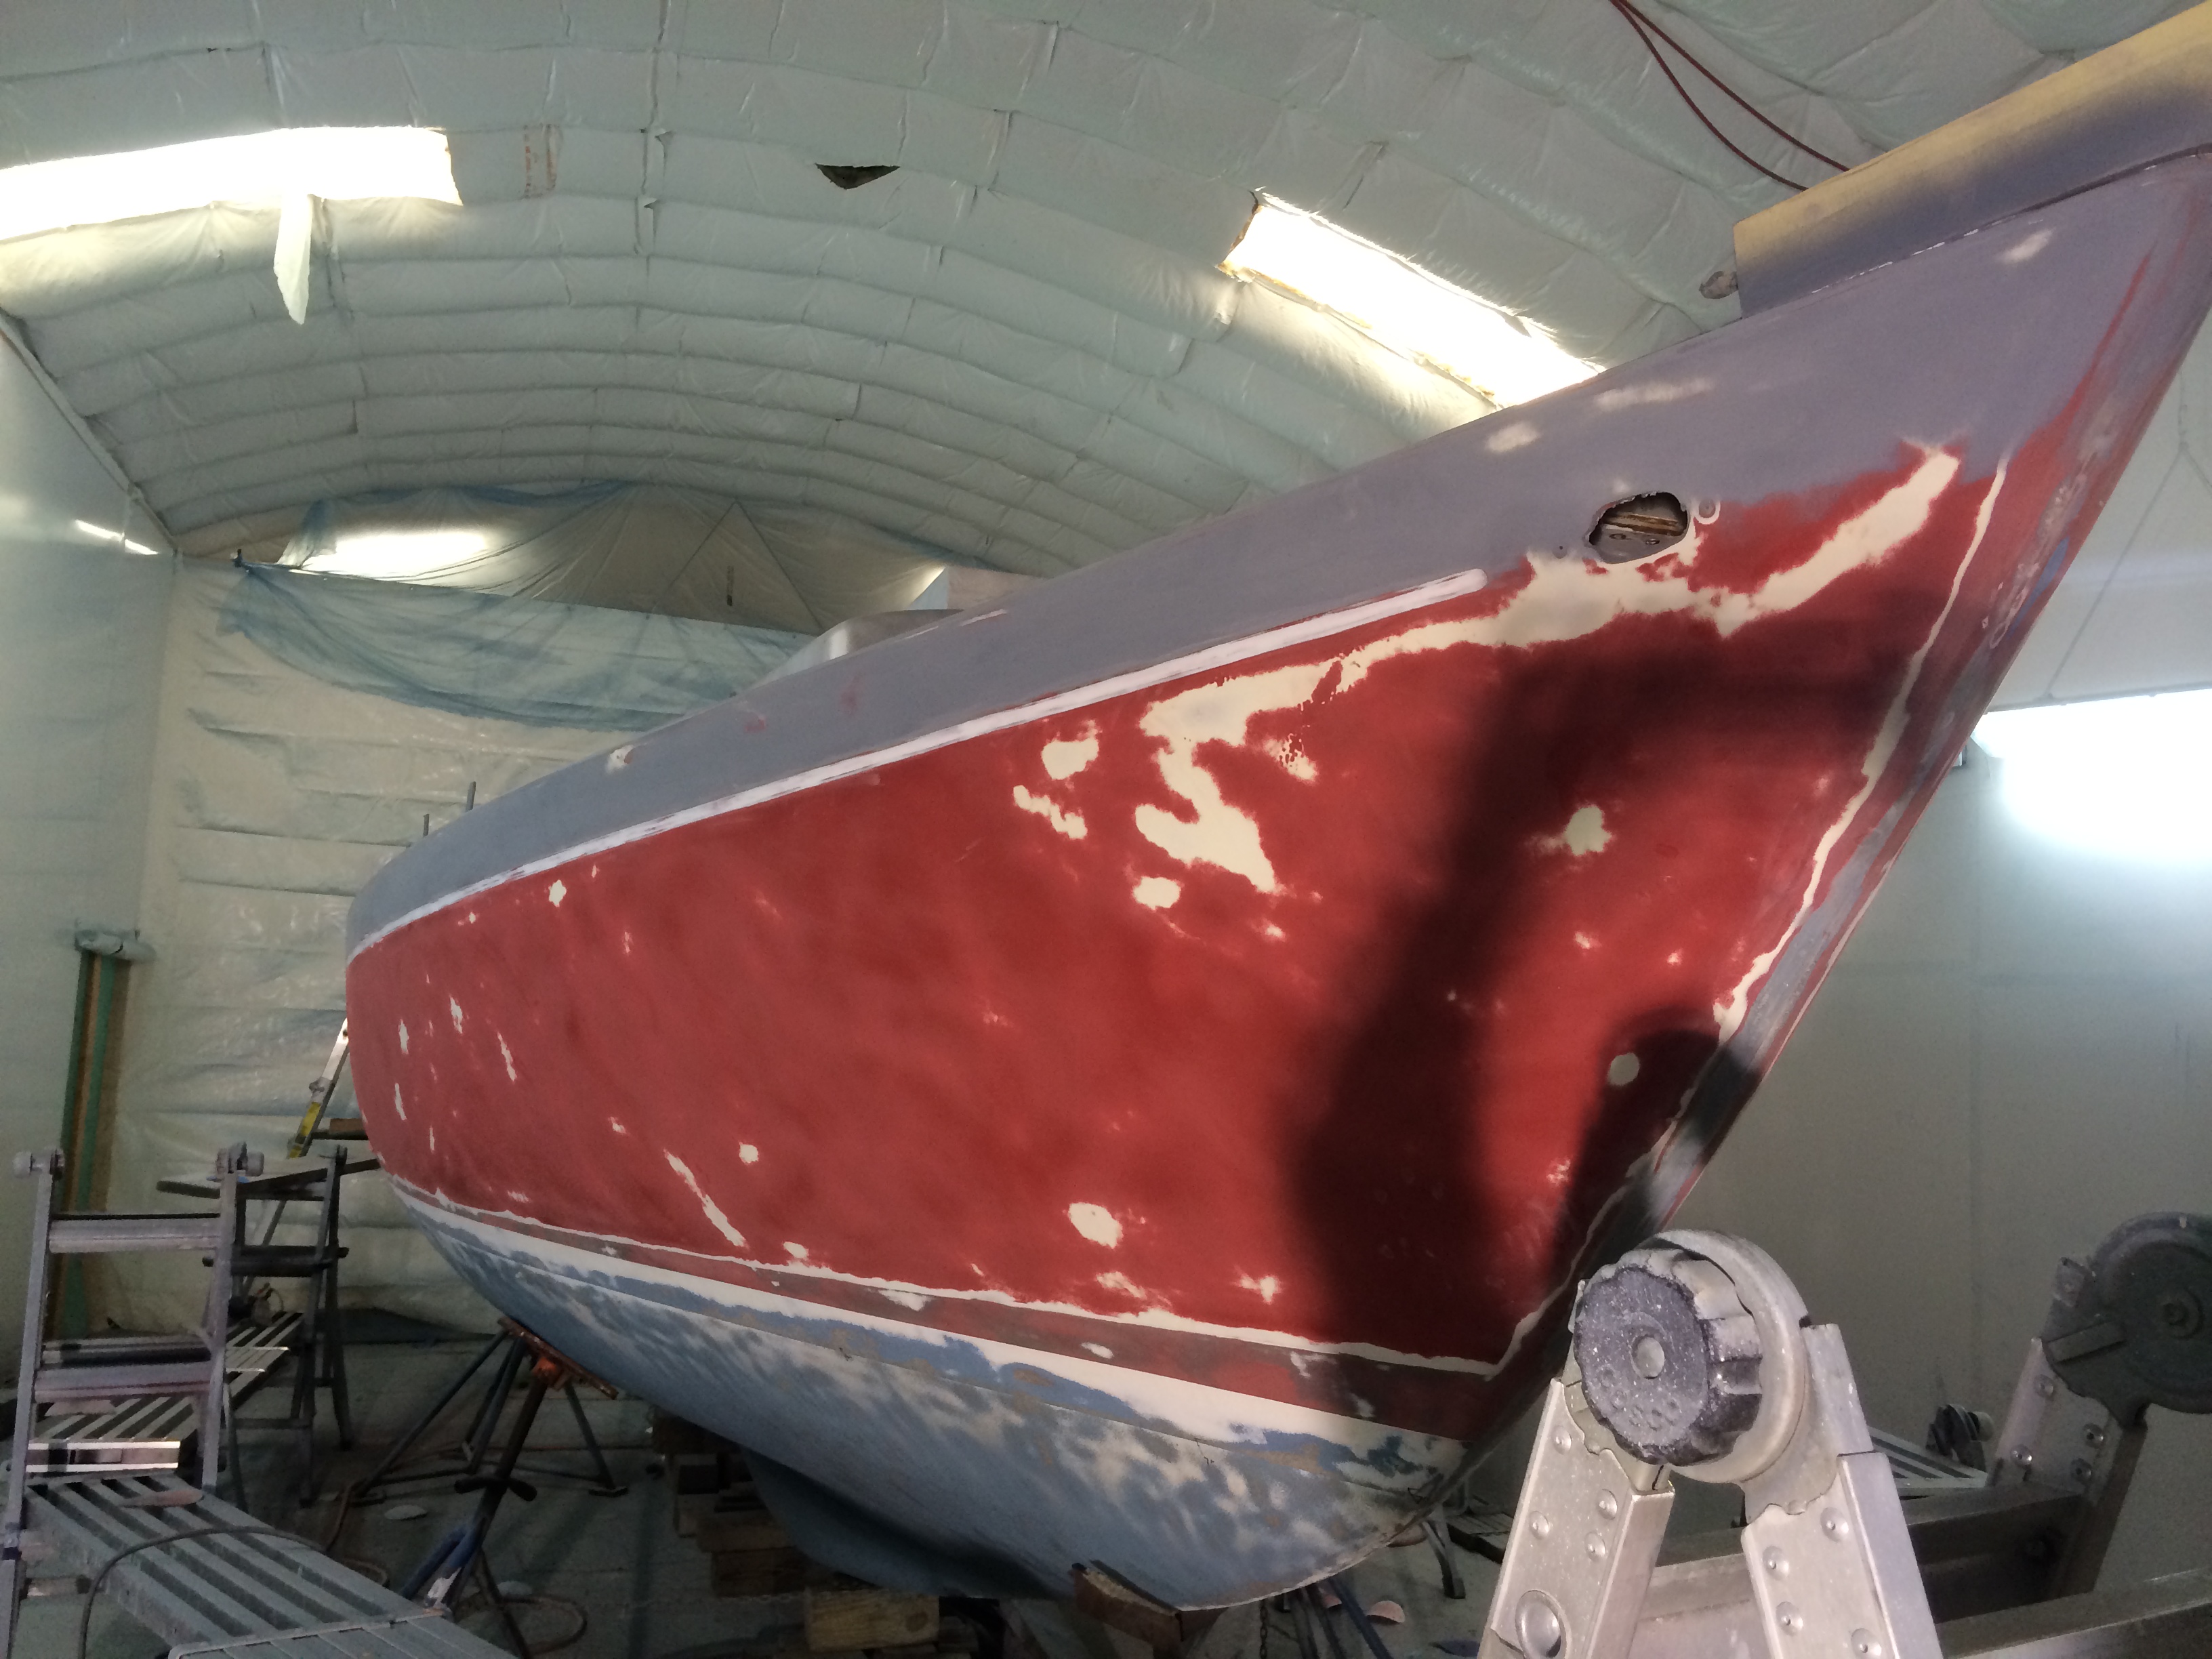 Colombia 32'- Early stages of hull refinishing